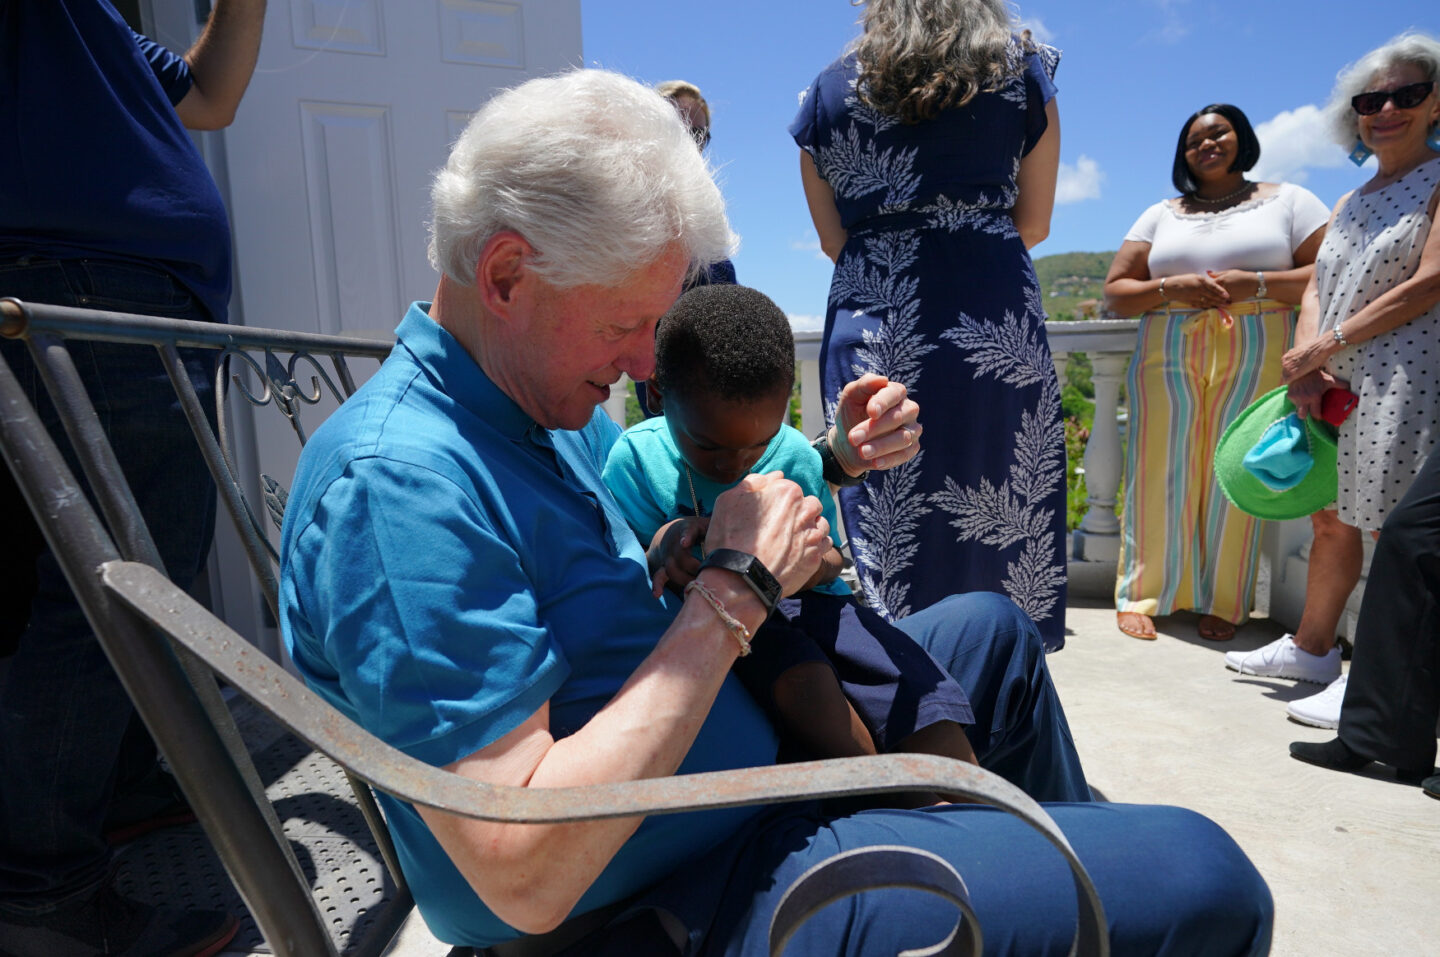 President Clinton plays a video game with a child in the U.S. Virgin Islands